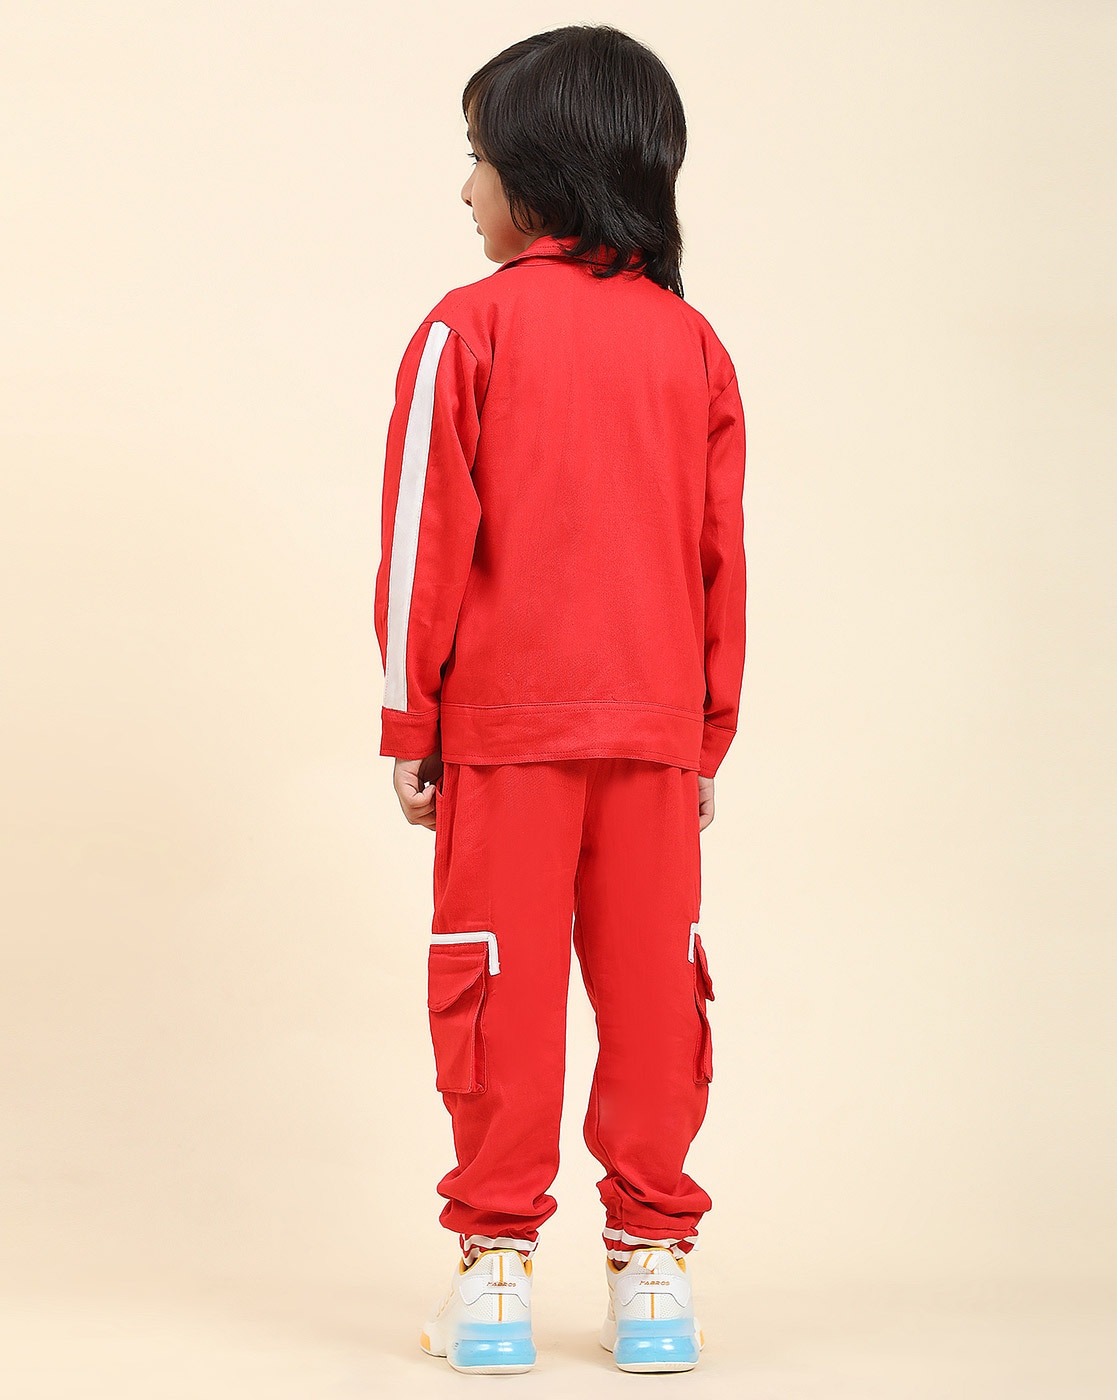 Boys Since 1890 Joggers in Tango Red